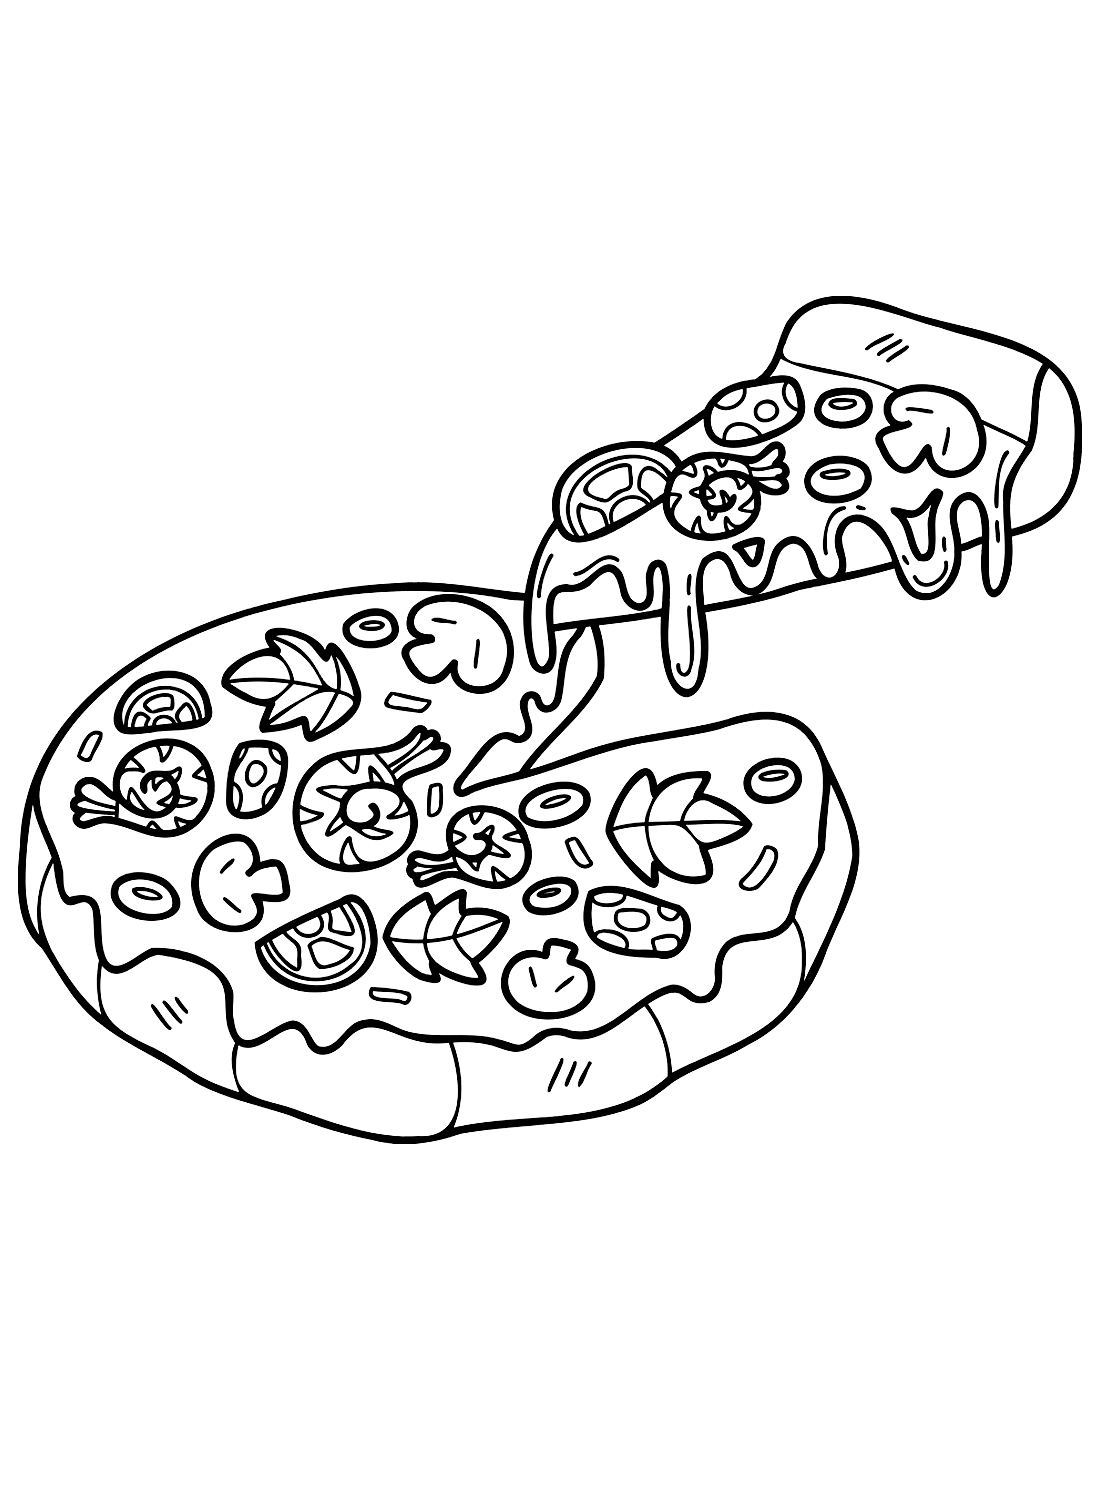 Color Sheet of Pizza